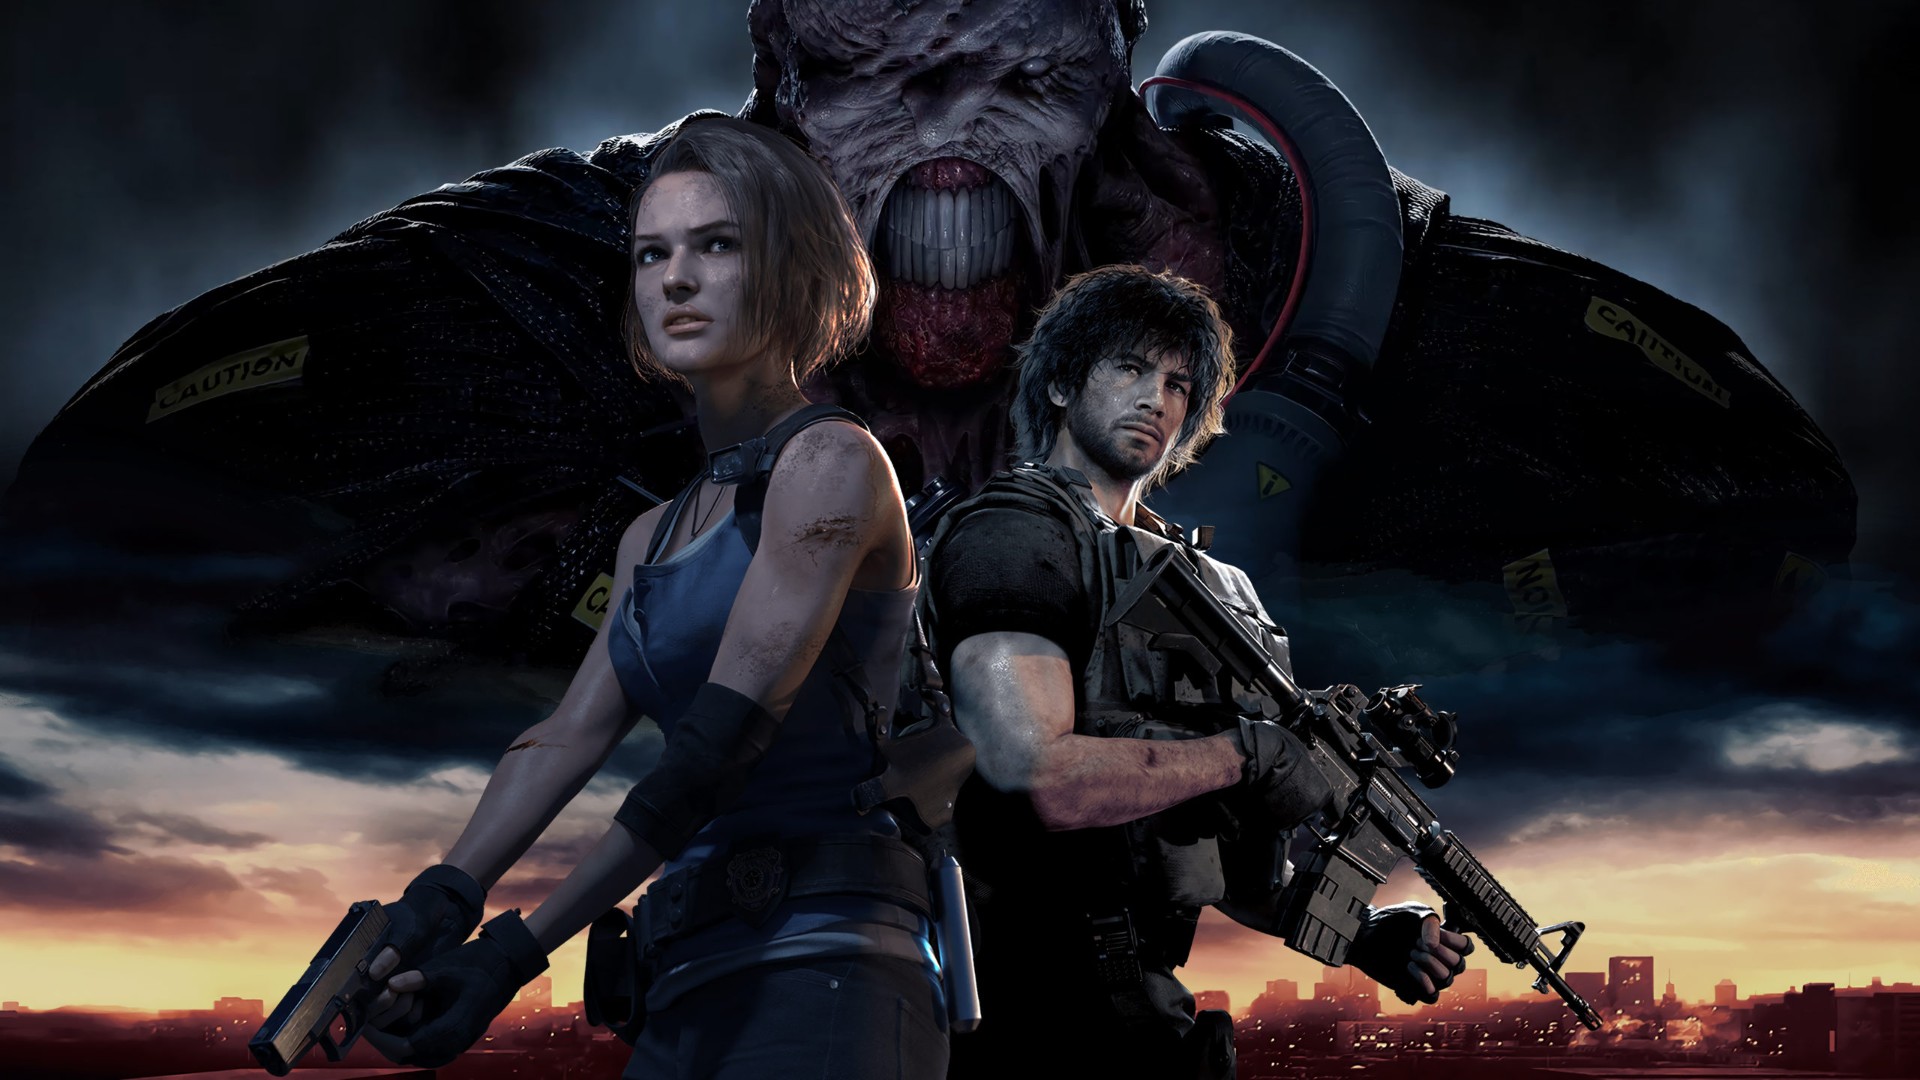 Resident Evil 3 review: A glimpse into post-pandemic fiction